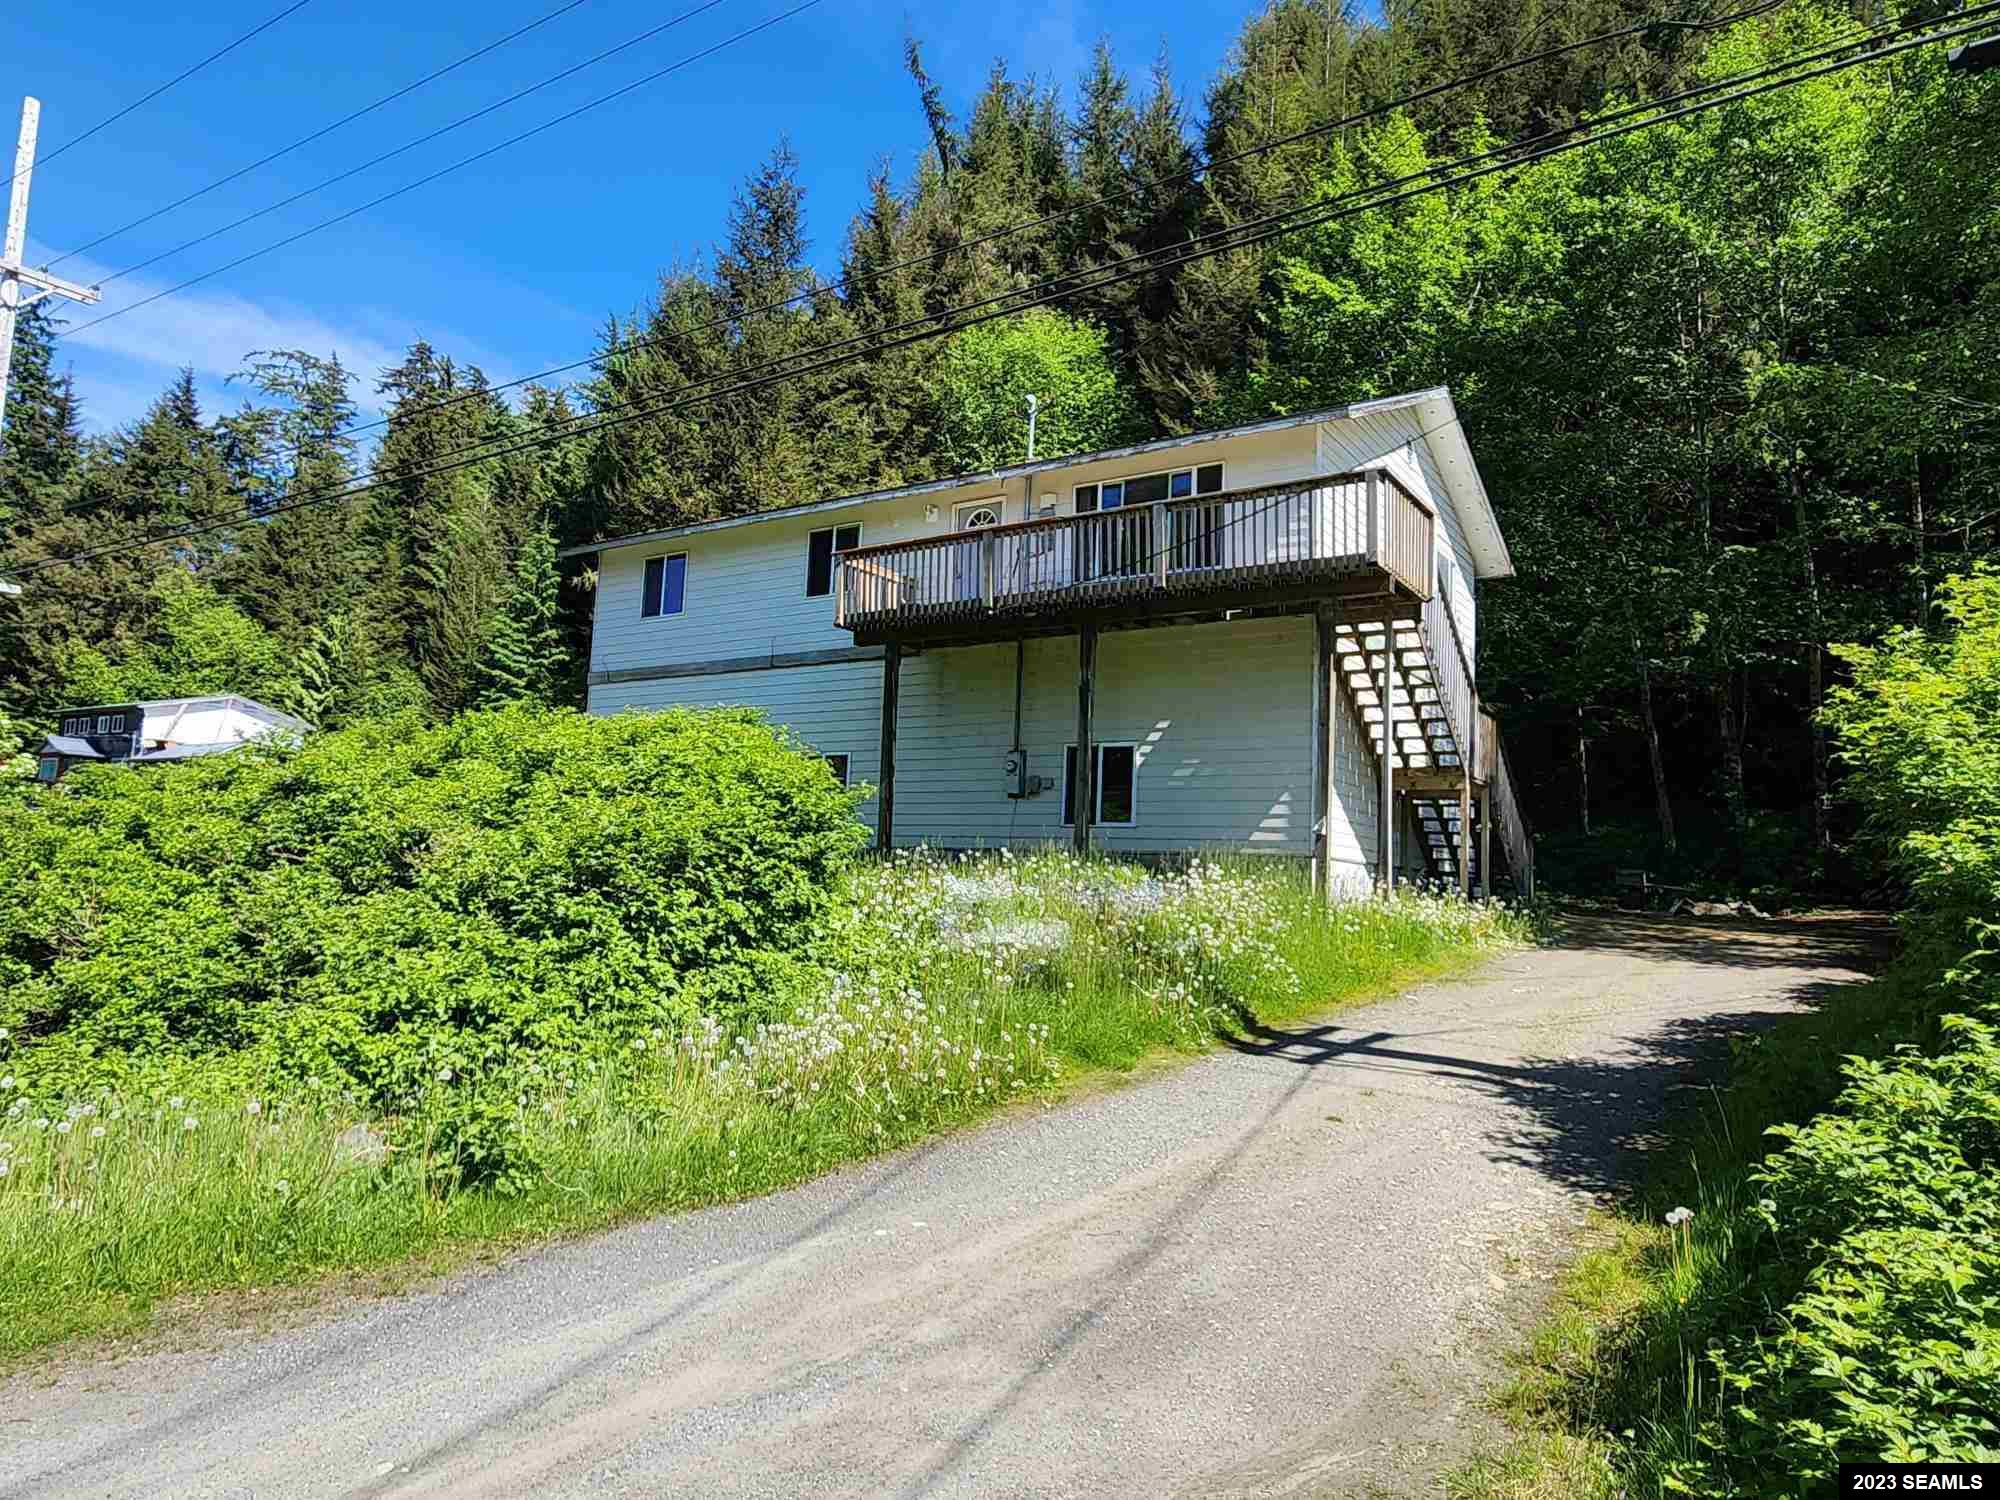 14968 Tongass Hwy., Ketchikan, AK 99901, 3 Bedrooms Bedrooms, ,1.5 BathroomsBathrooms,Residential,For Sale,Tongass Hwy.,23208